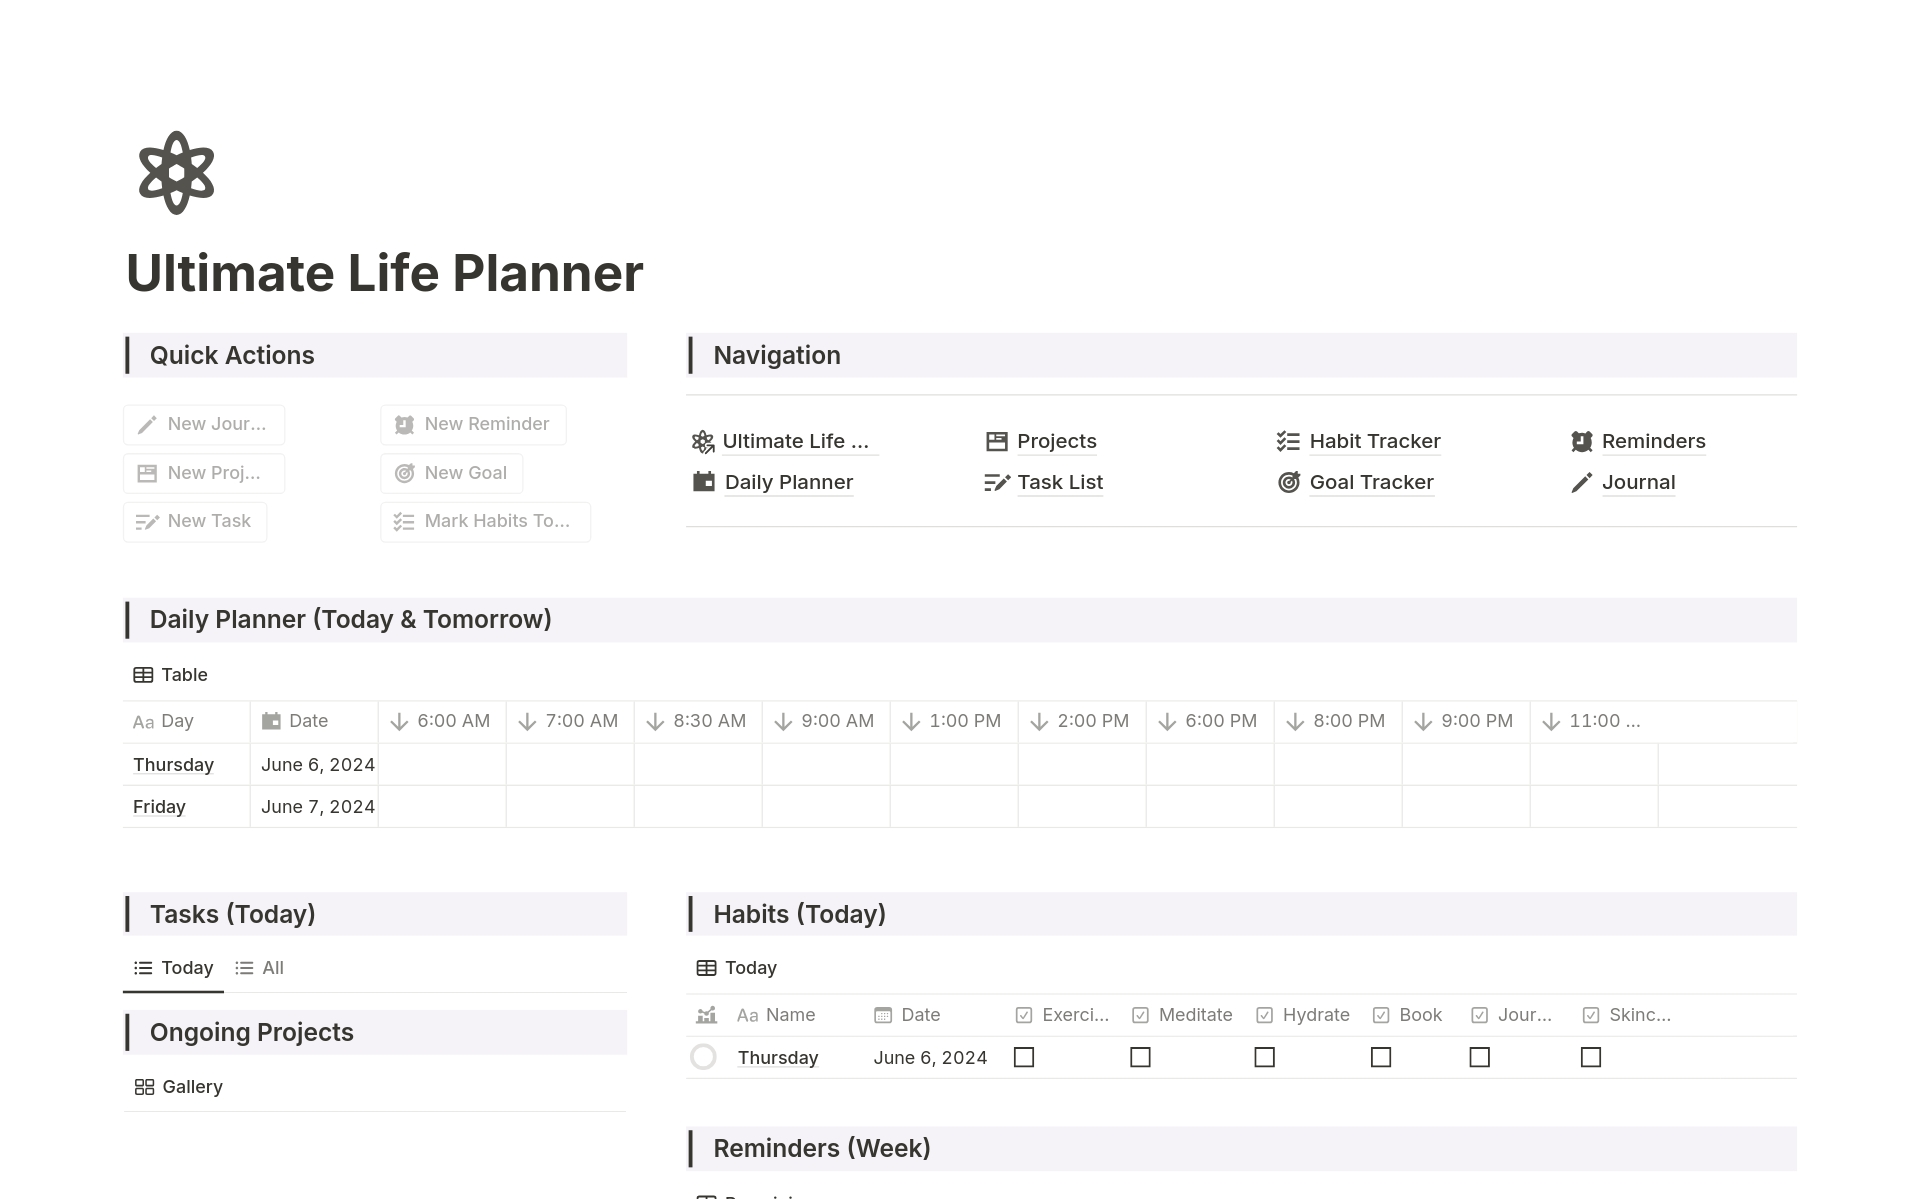 This template can conquer life's chaos! (Published in Notion's gallery!) Plan days hourly, track habits, journal, set reminders & manage projects. Daily tasks appear in the dashboard - stay organized, achieve goals & get notified! Download your "Life Planner" Notion template 